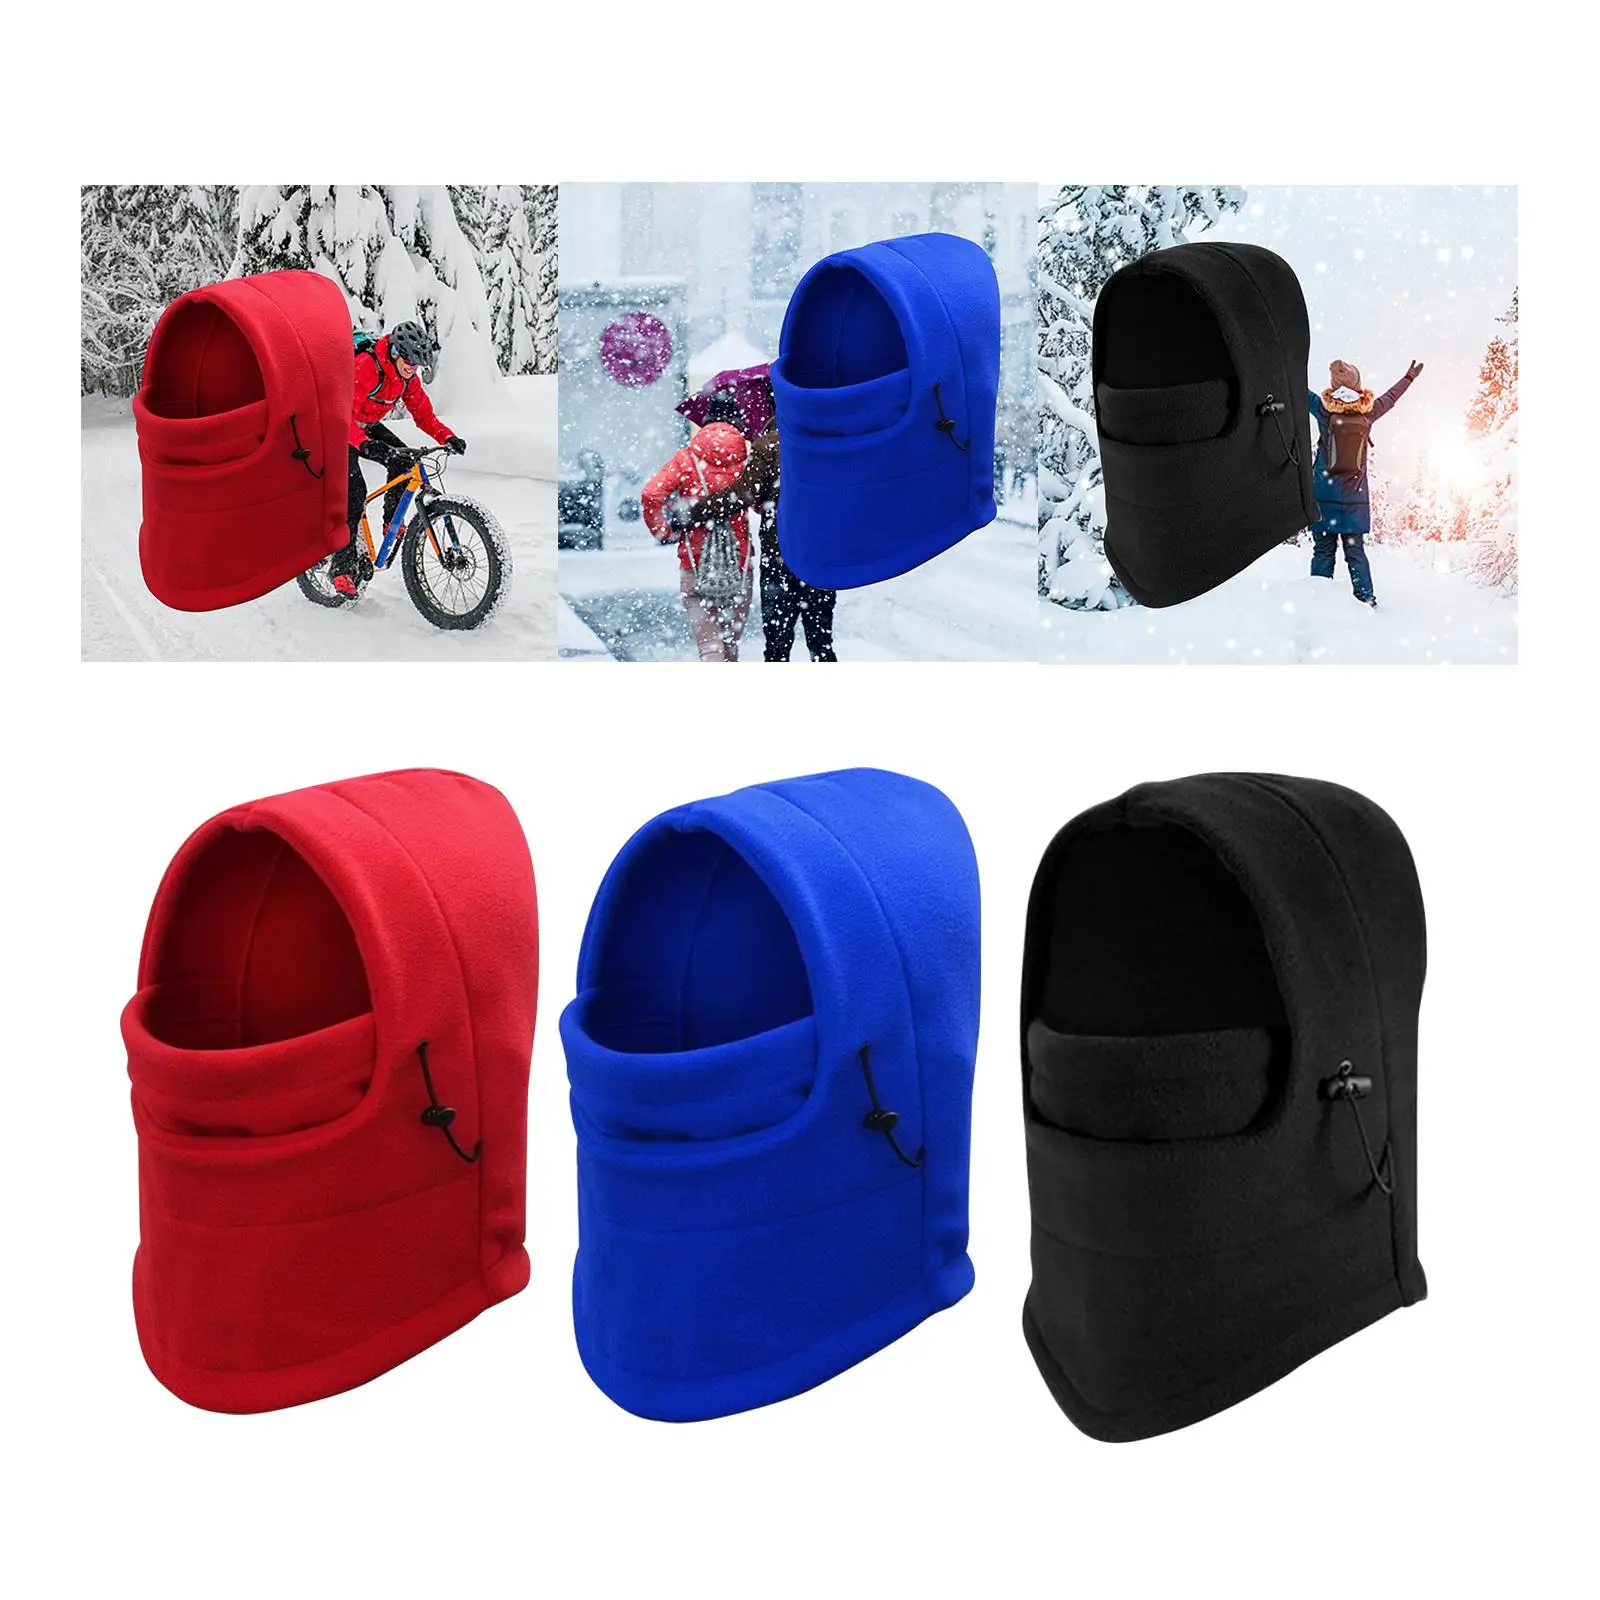 Balaclava Ski Face Cover Windproof Neck Warmer Universal for Men and Women